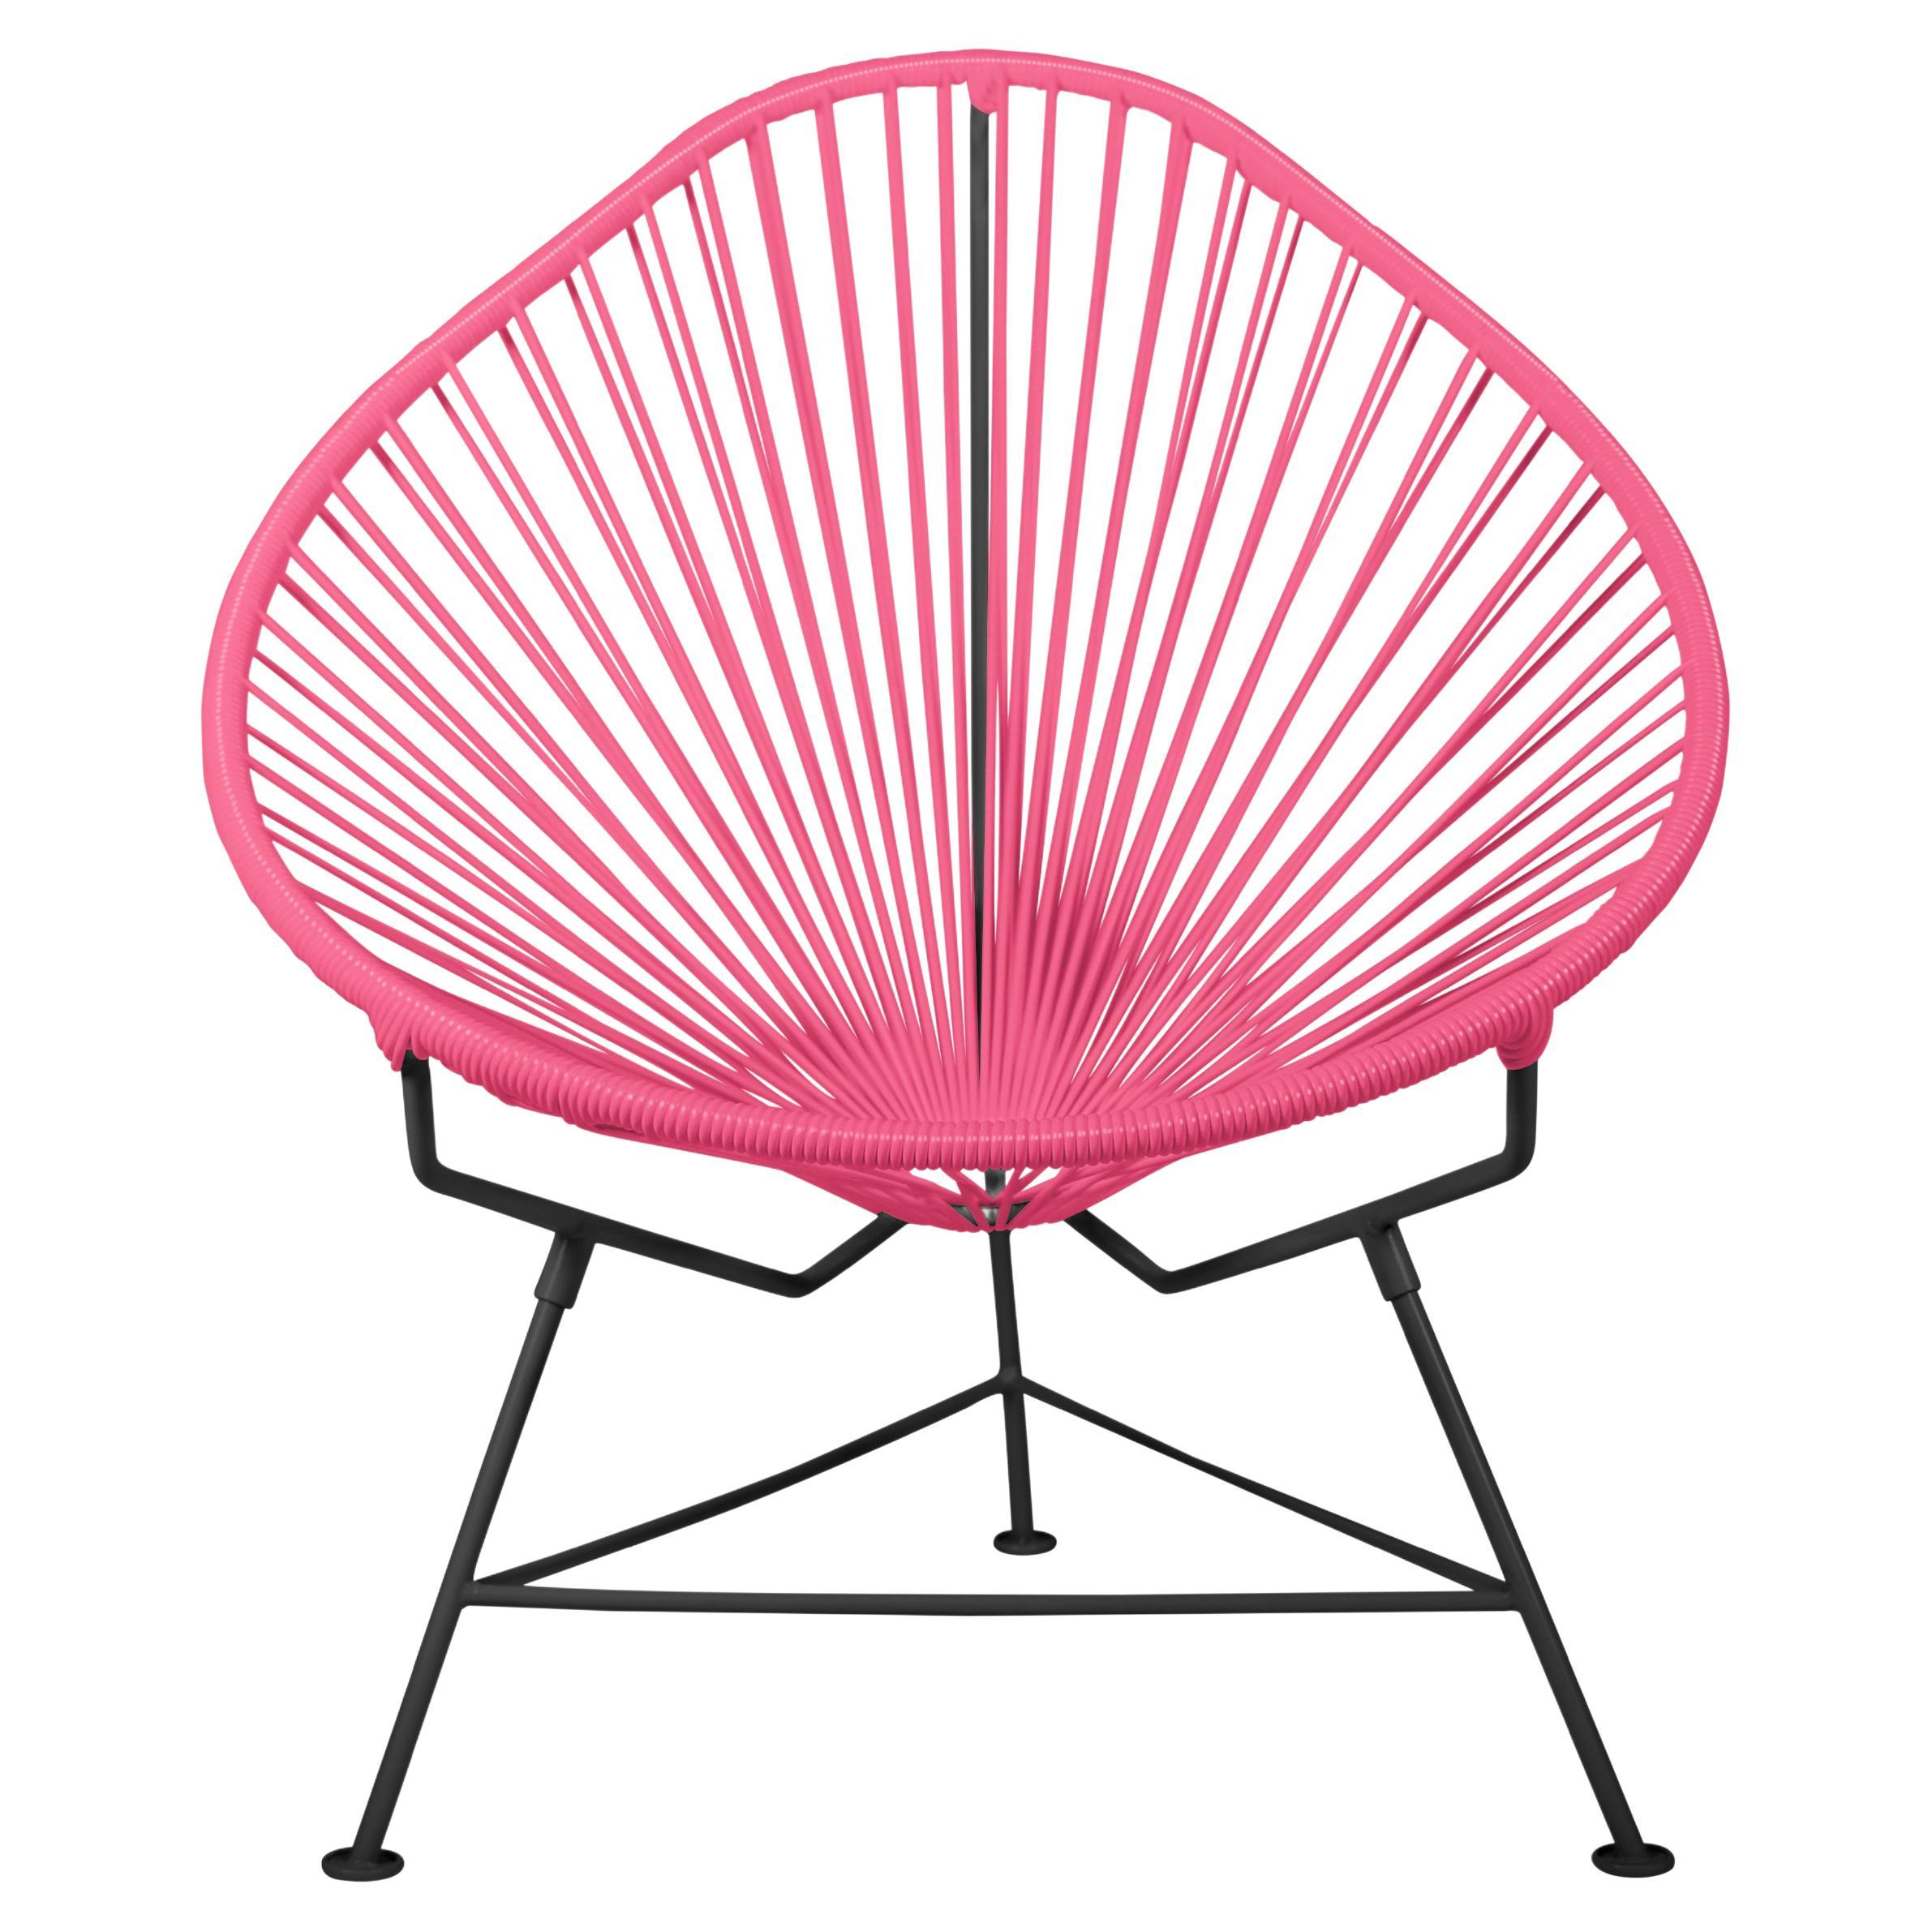 Innit Designs Acapulco Chair Pink Weave on Black Frame For Sale